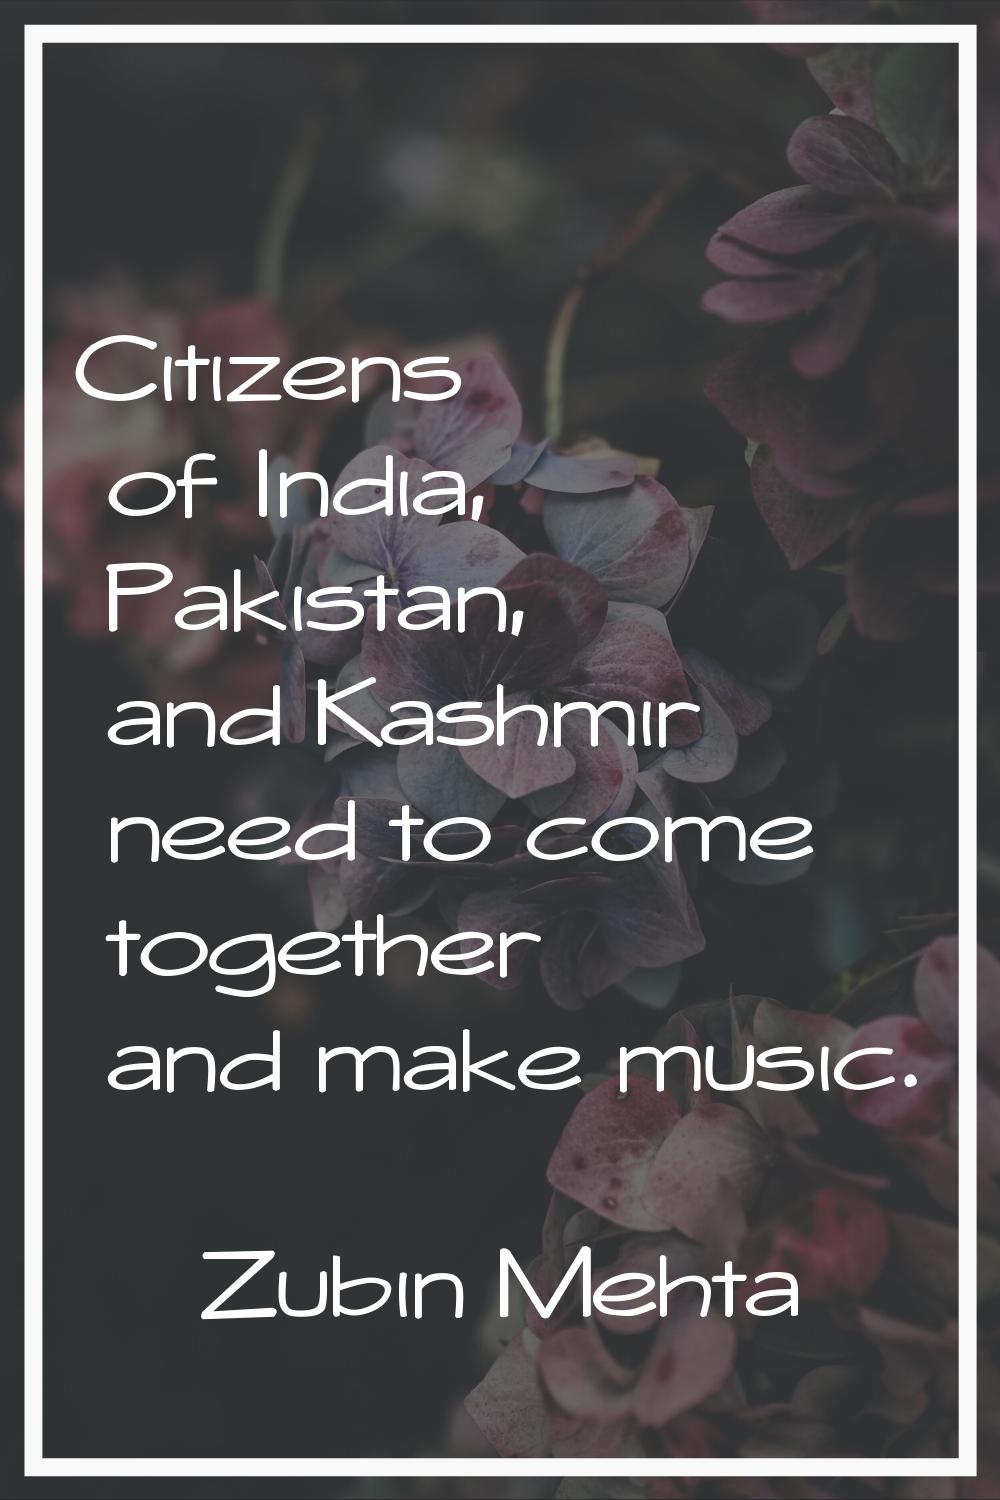 Citizens of India, Pakistan, and Kashmir need to come together and make music.